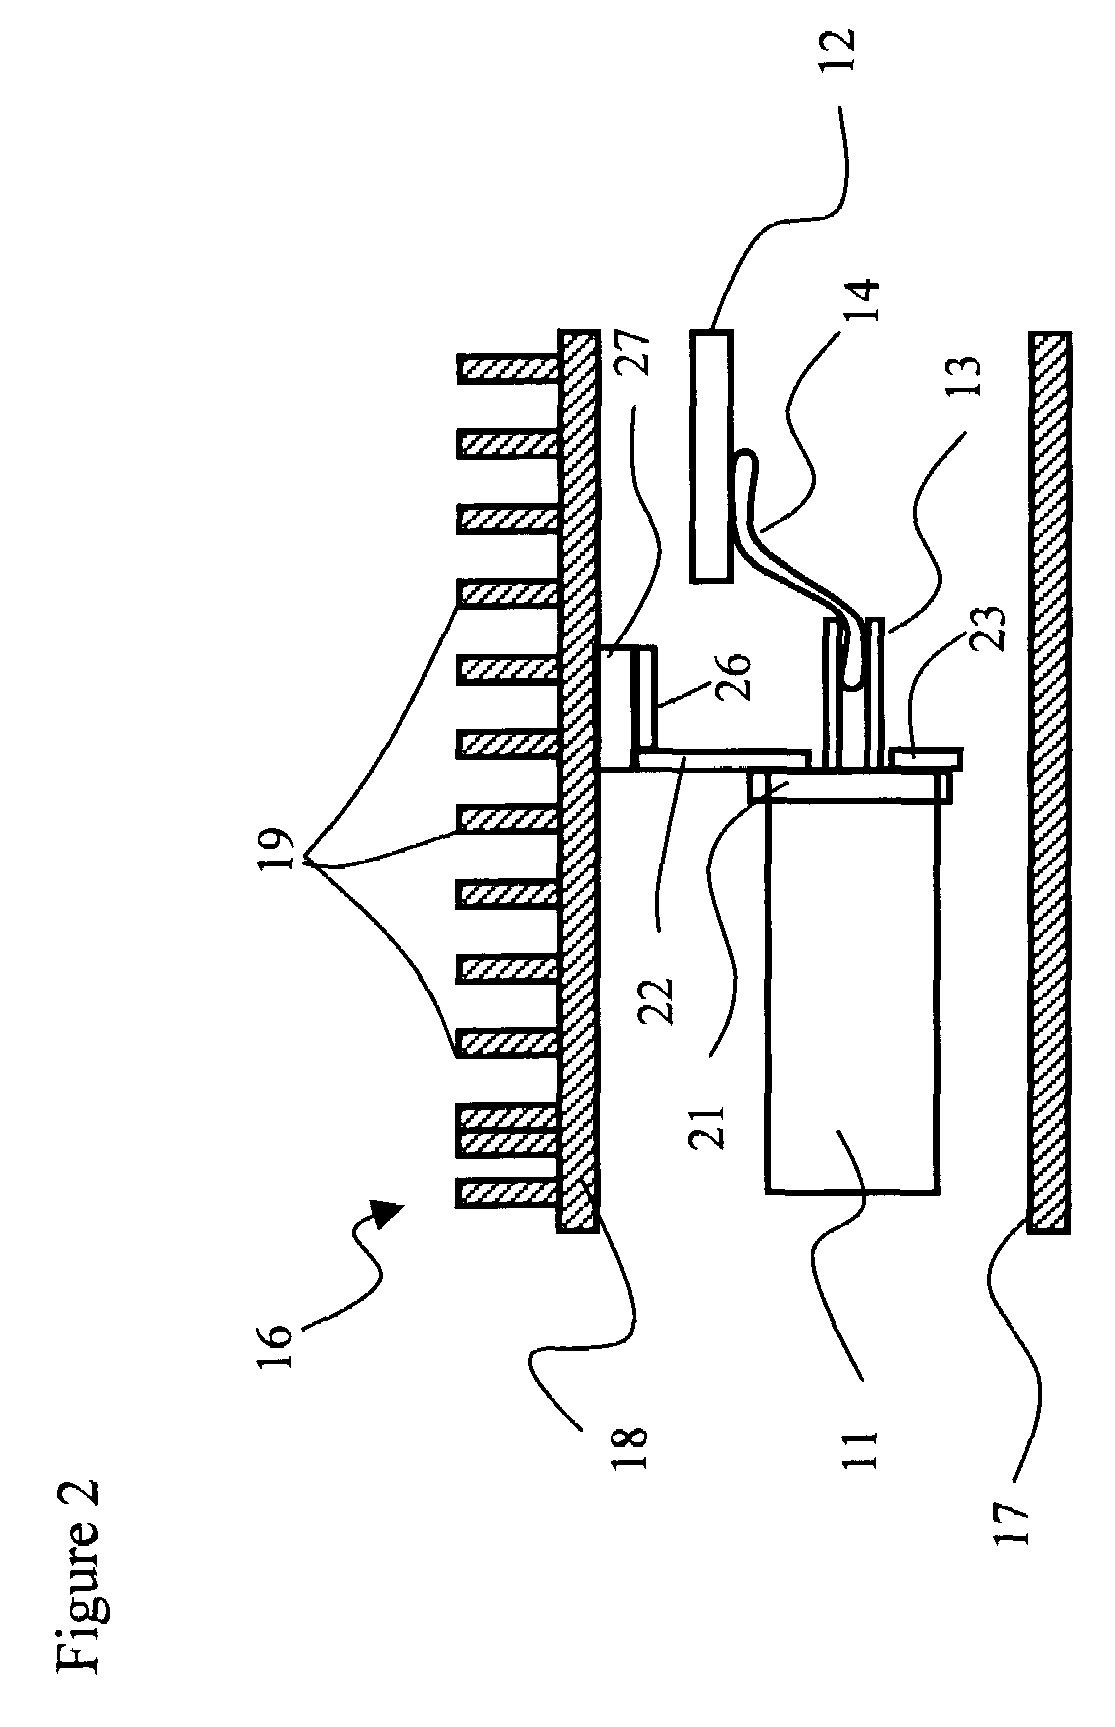 Heat sink tab for optical sub-assembly